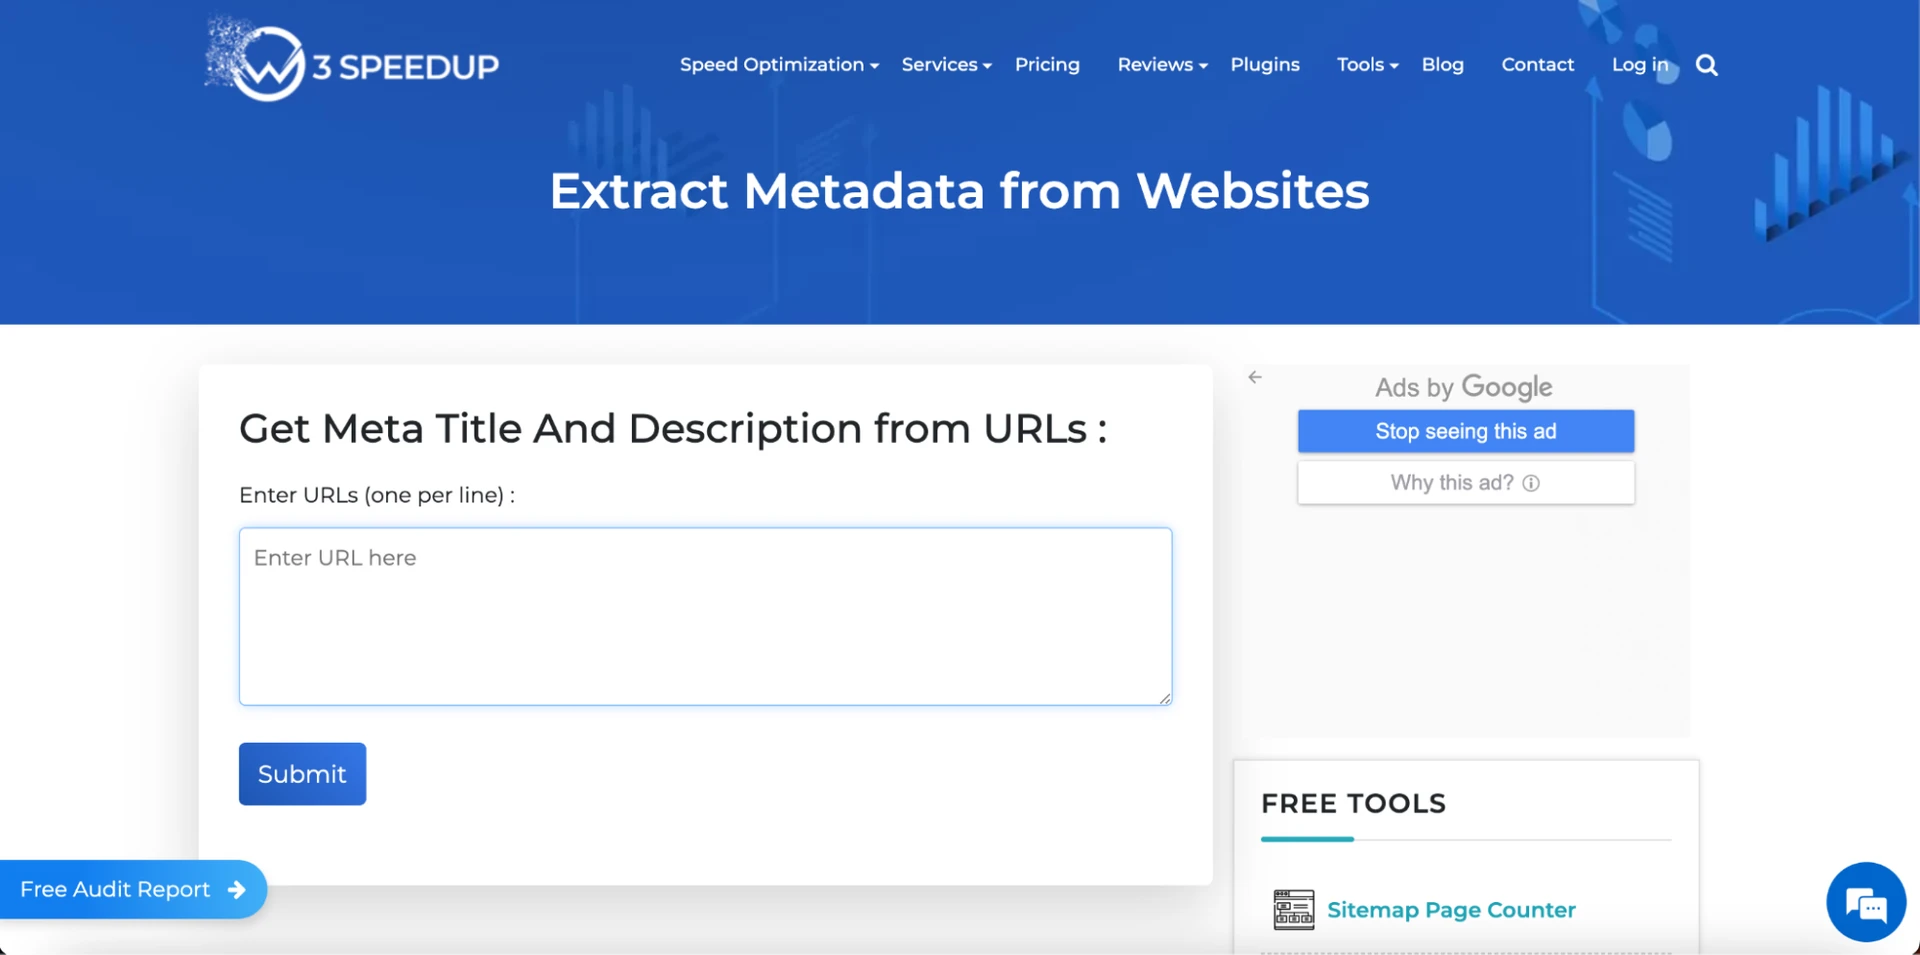 Extract the Meta Title and Meta Description with the W3 SpeedUp Meta Tag Extractor tool - Extract Metadata from Websites